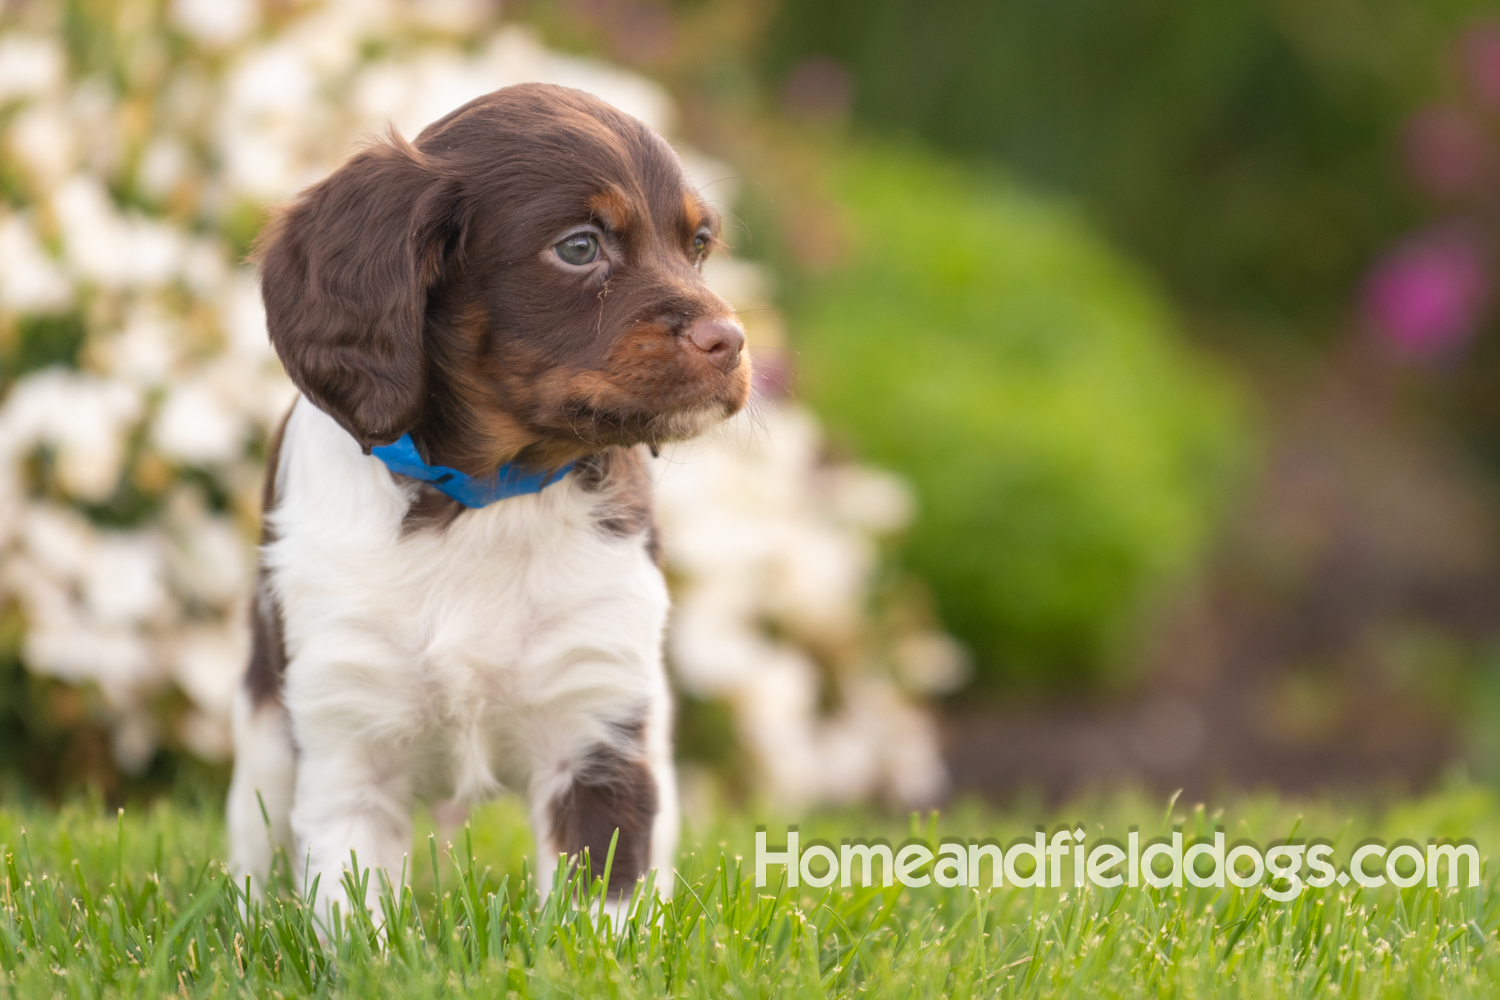 Adorable French Brittany puppies for sale posed in front of flowers